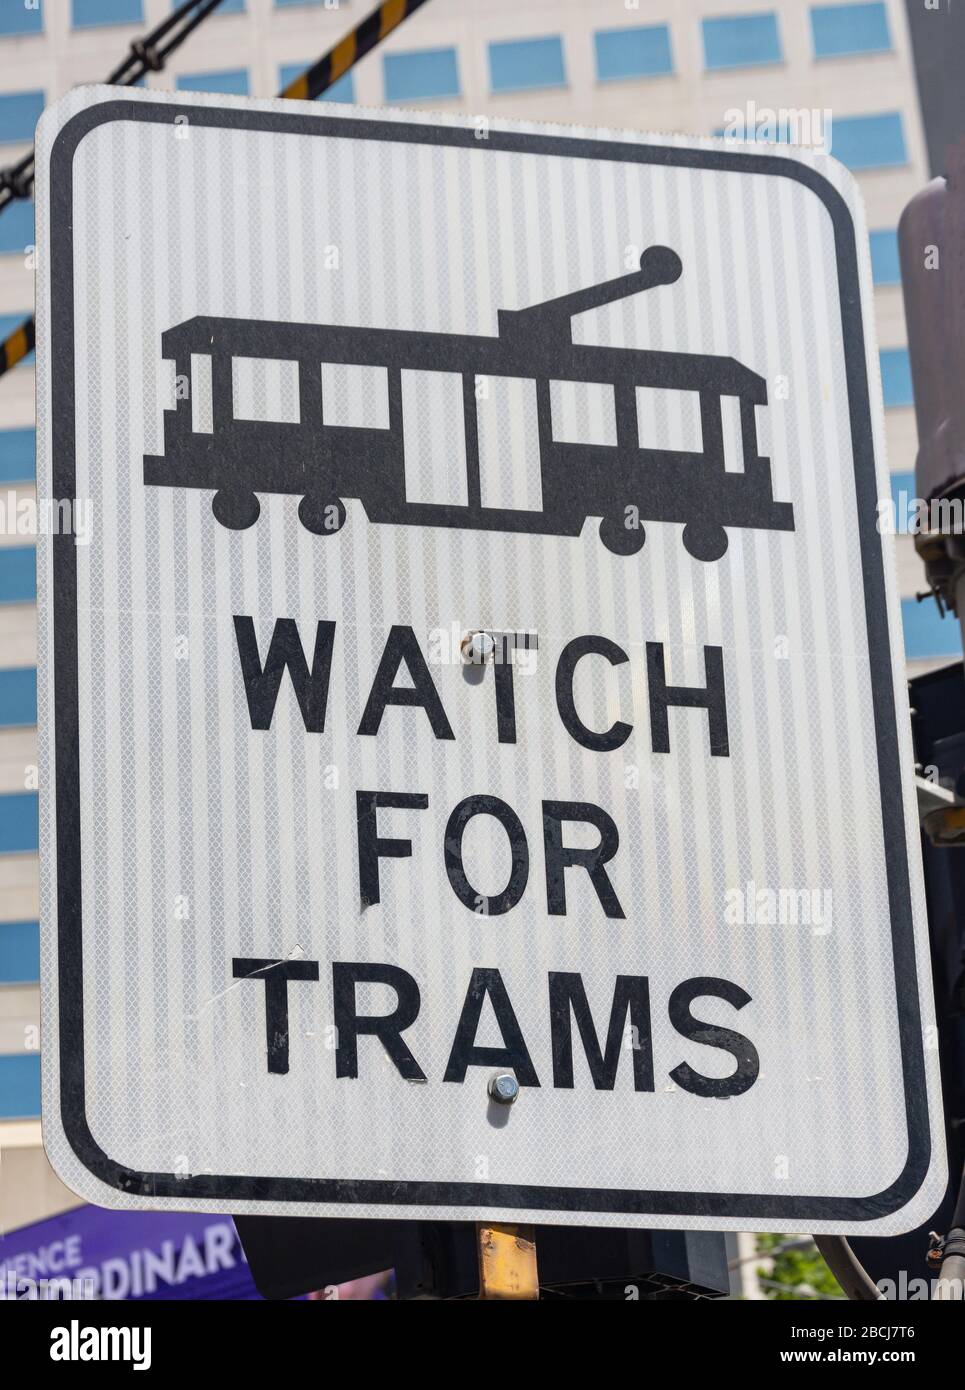 'Watch for trams' sign, Bourke Street, City Central, Melbourne, Victoria, Australia Stock Photo